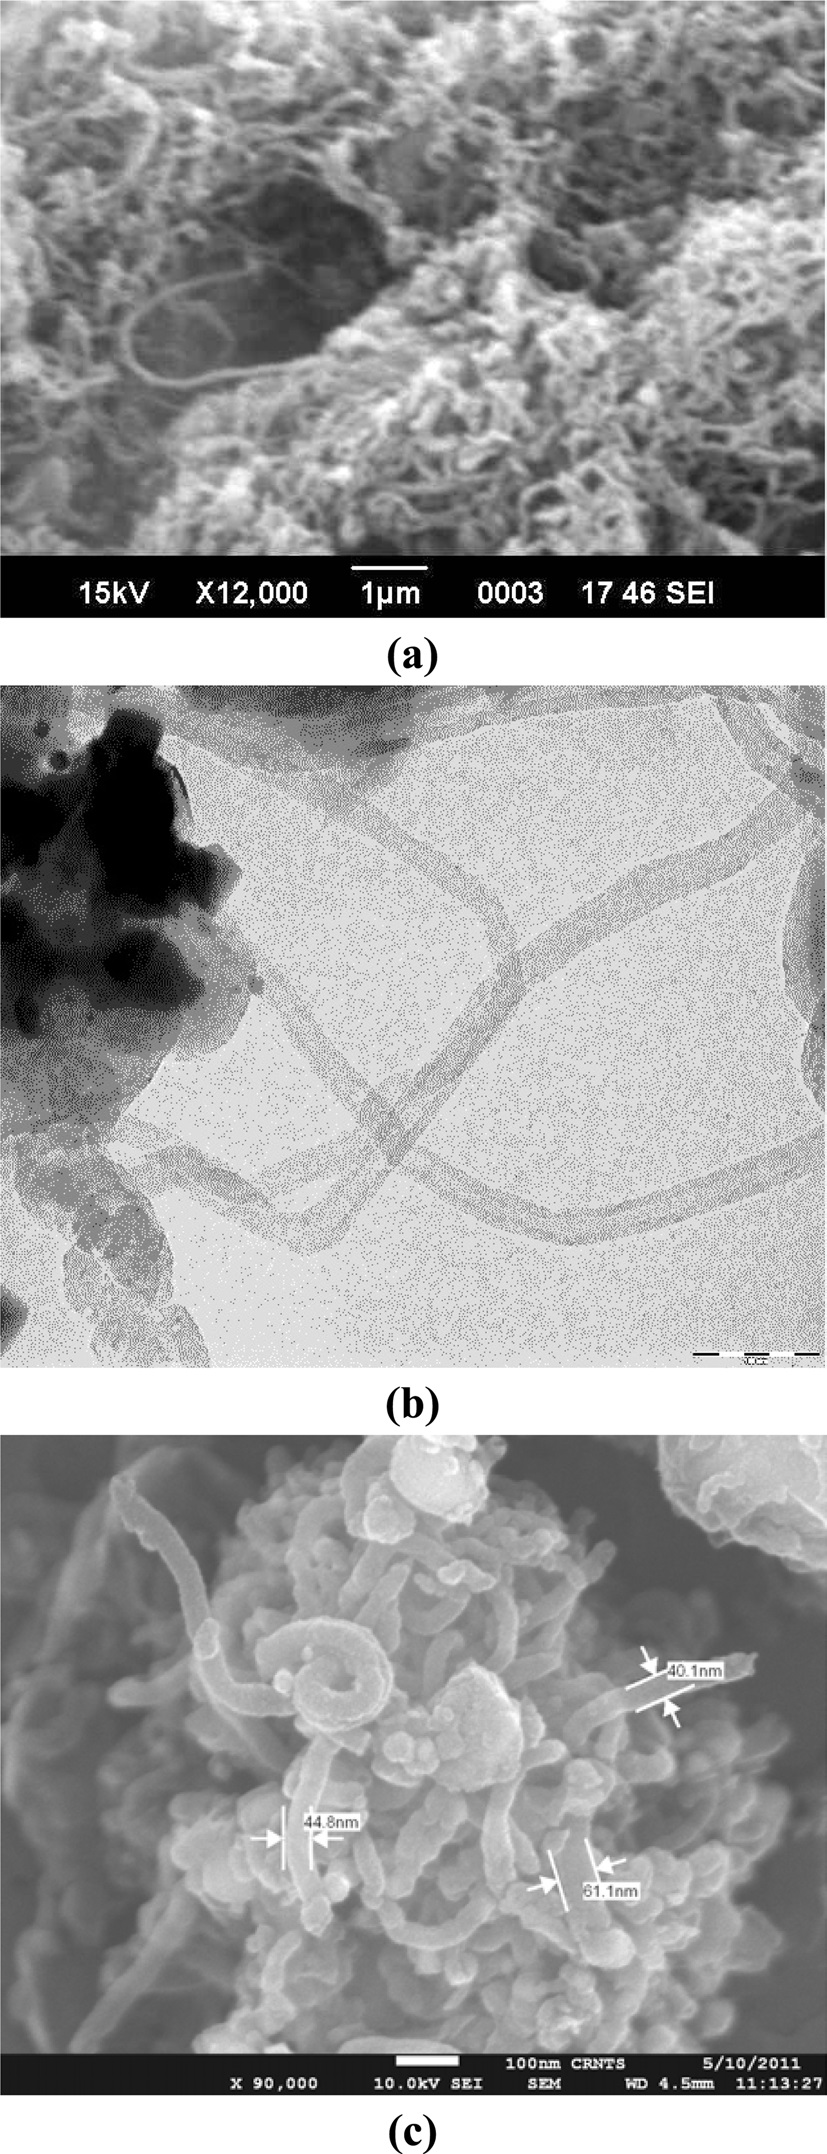 Images of coiled carbon nanotubes from karanja oil synthesized
under different pyrolytic conditions: (a) scanning electron microscopy
(SEM) of coiled nanotubes synthesized in the presence of Ar & Zn at
900℃, (b) transmission electron microscopy (TEM) of coiled nanotubes
synthesized in the presence of H & Ni at 500℃, and (c) high-resolution
SEM of coiled nanotubes synthesized in the presence of N & Co at 700℃.